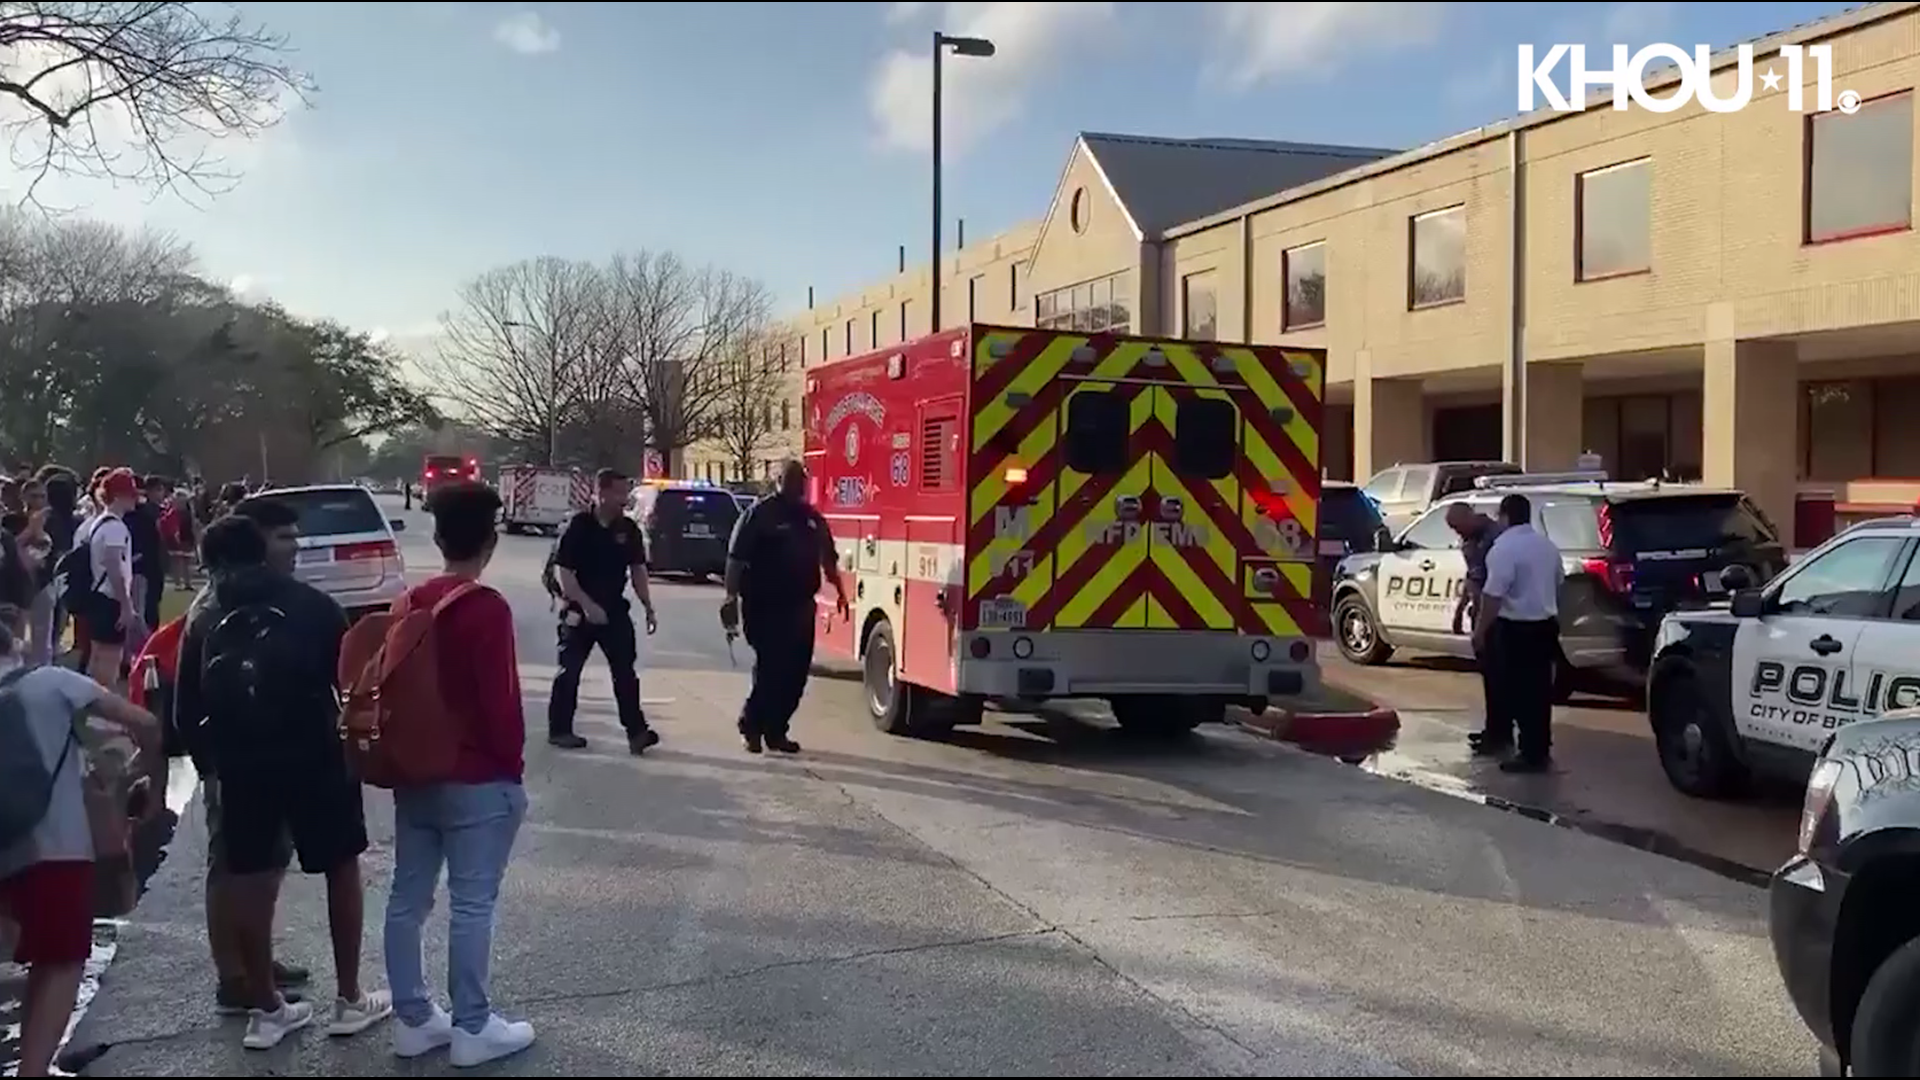 A 16-year-old student was killed Tuesday in a shooting at Bellaire High School. The victim's teenage classmate was later arrested in connection with the incident.